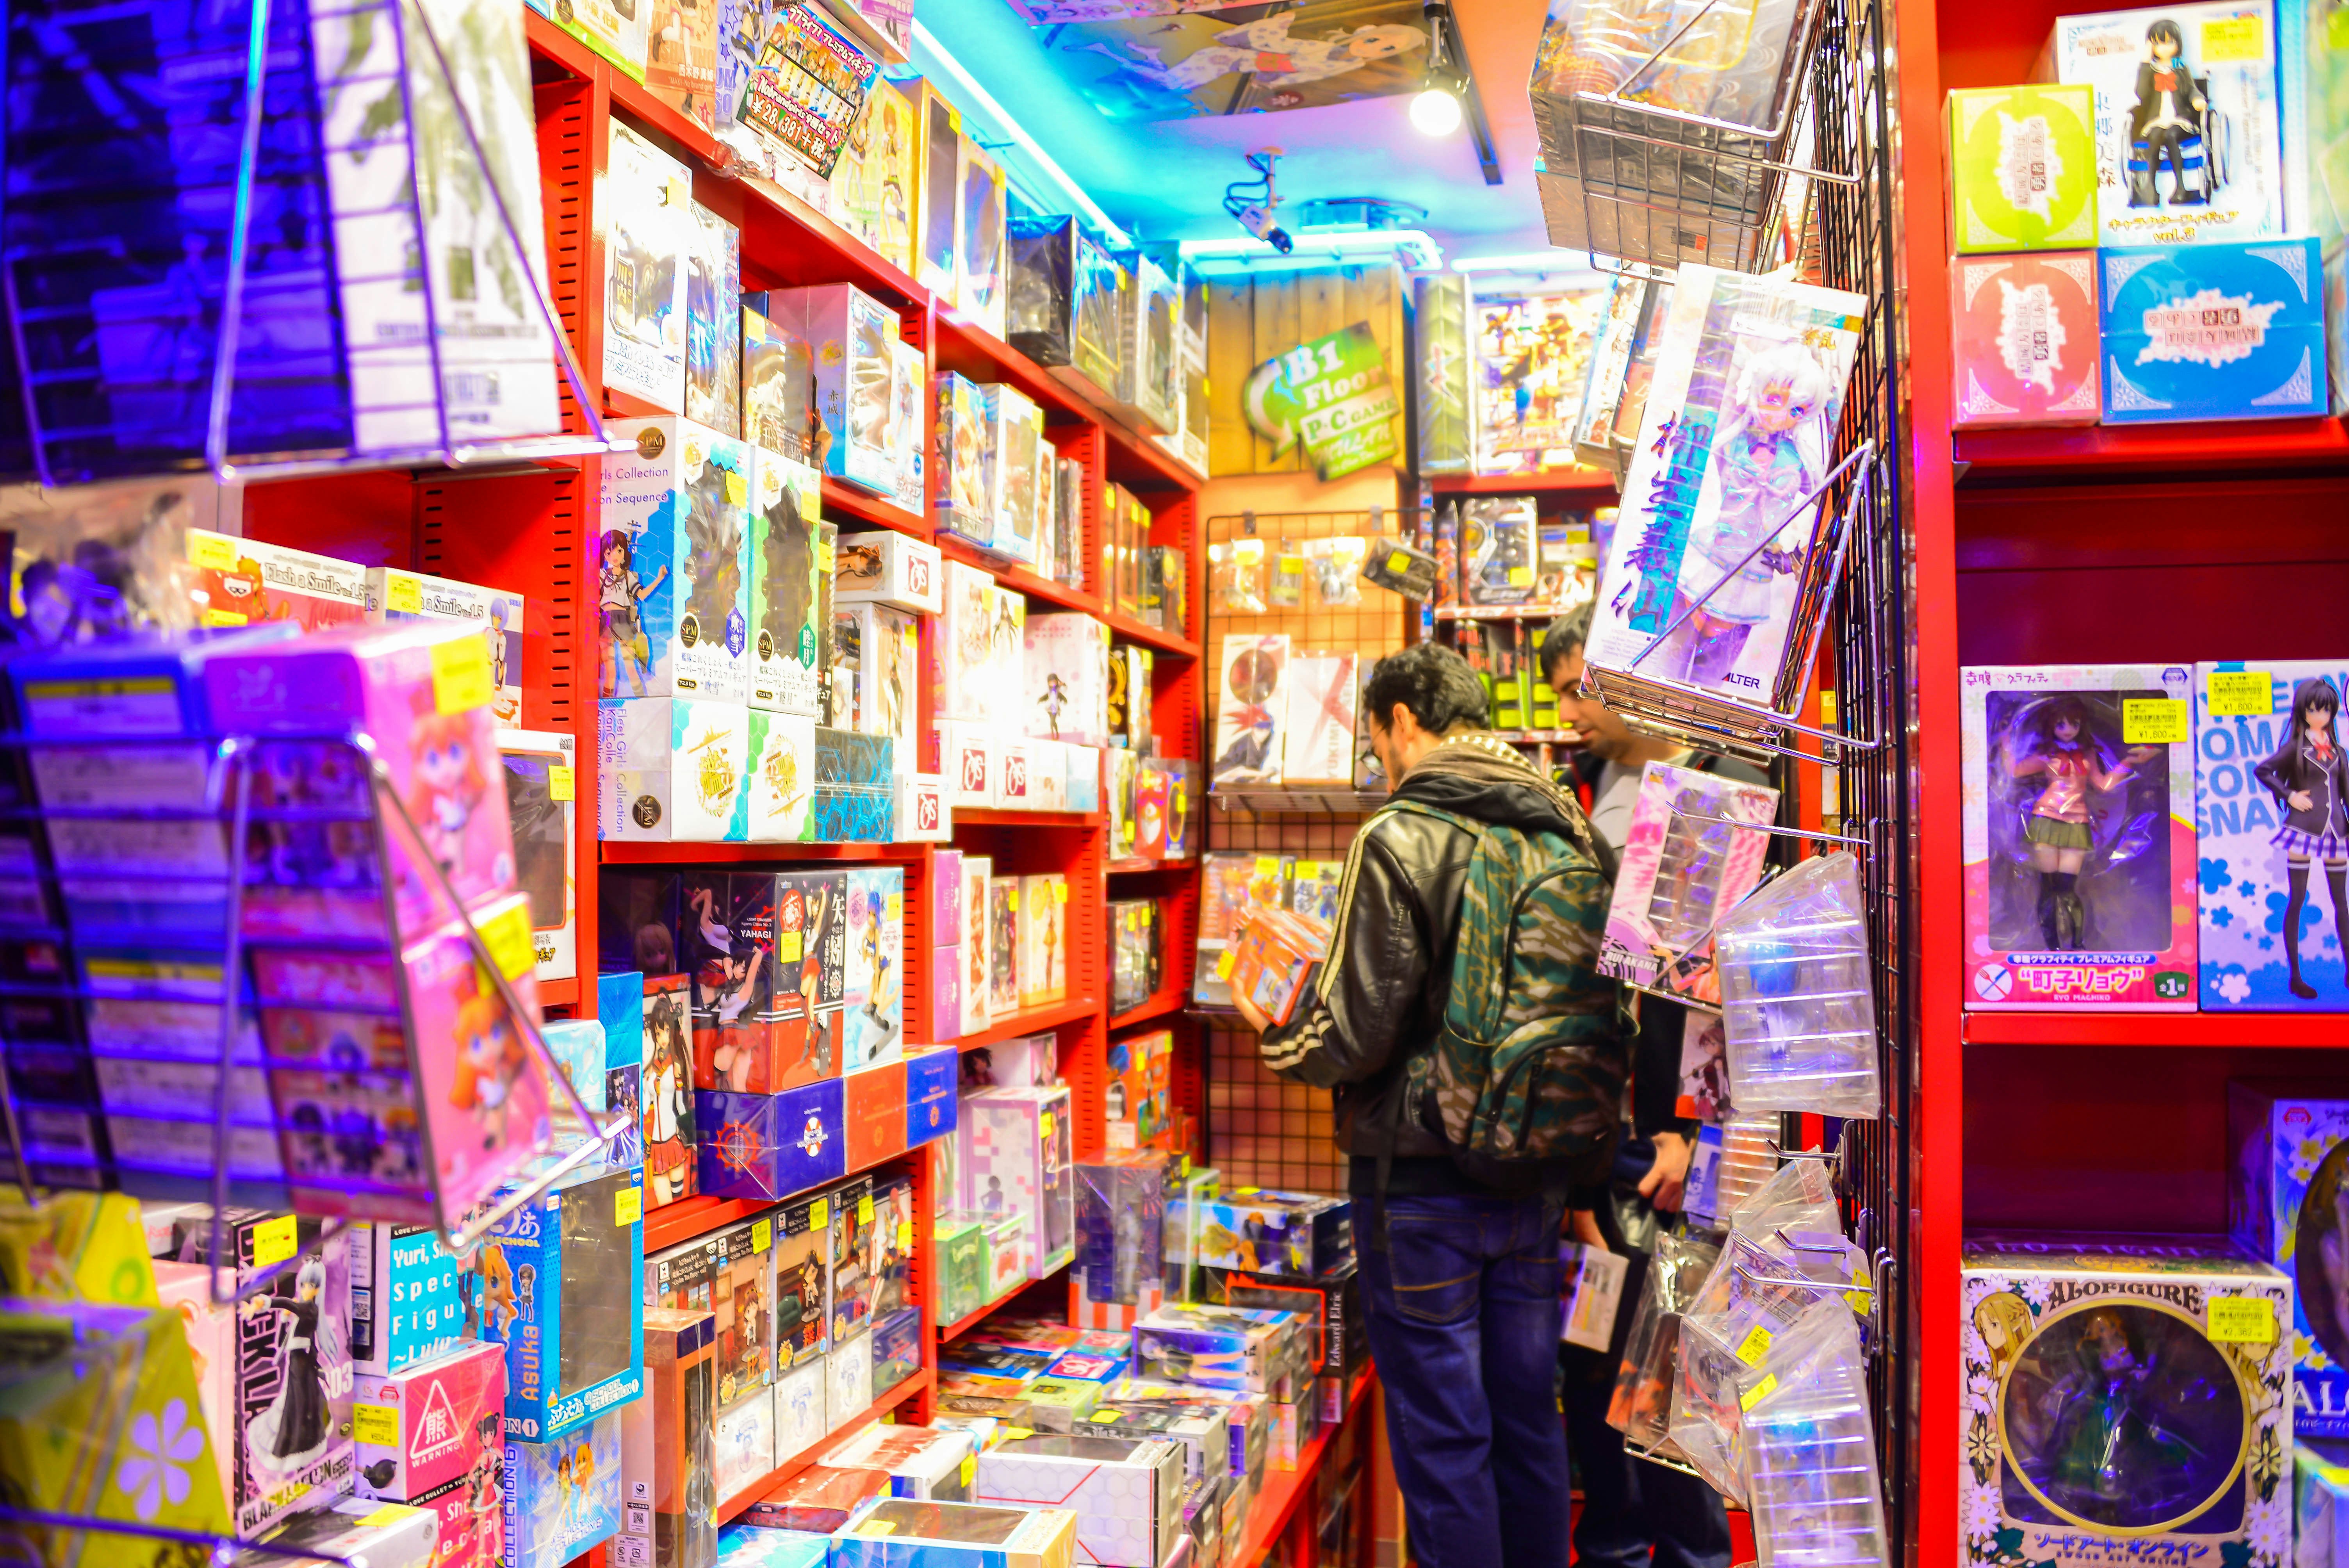 A man browses a comic book in a Manga store. The floor to ceiling walls around the shopper are filled with anime-style comics, toys and games.